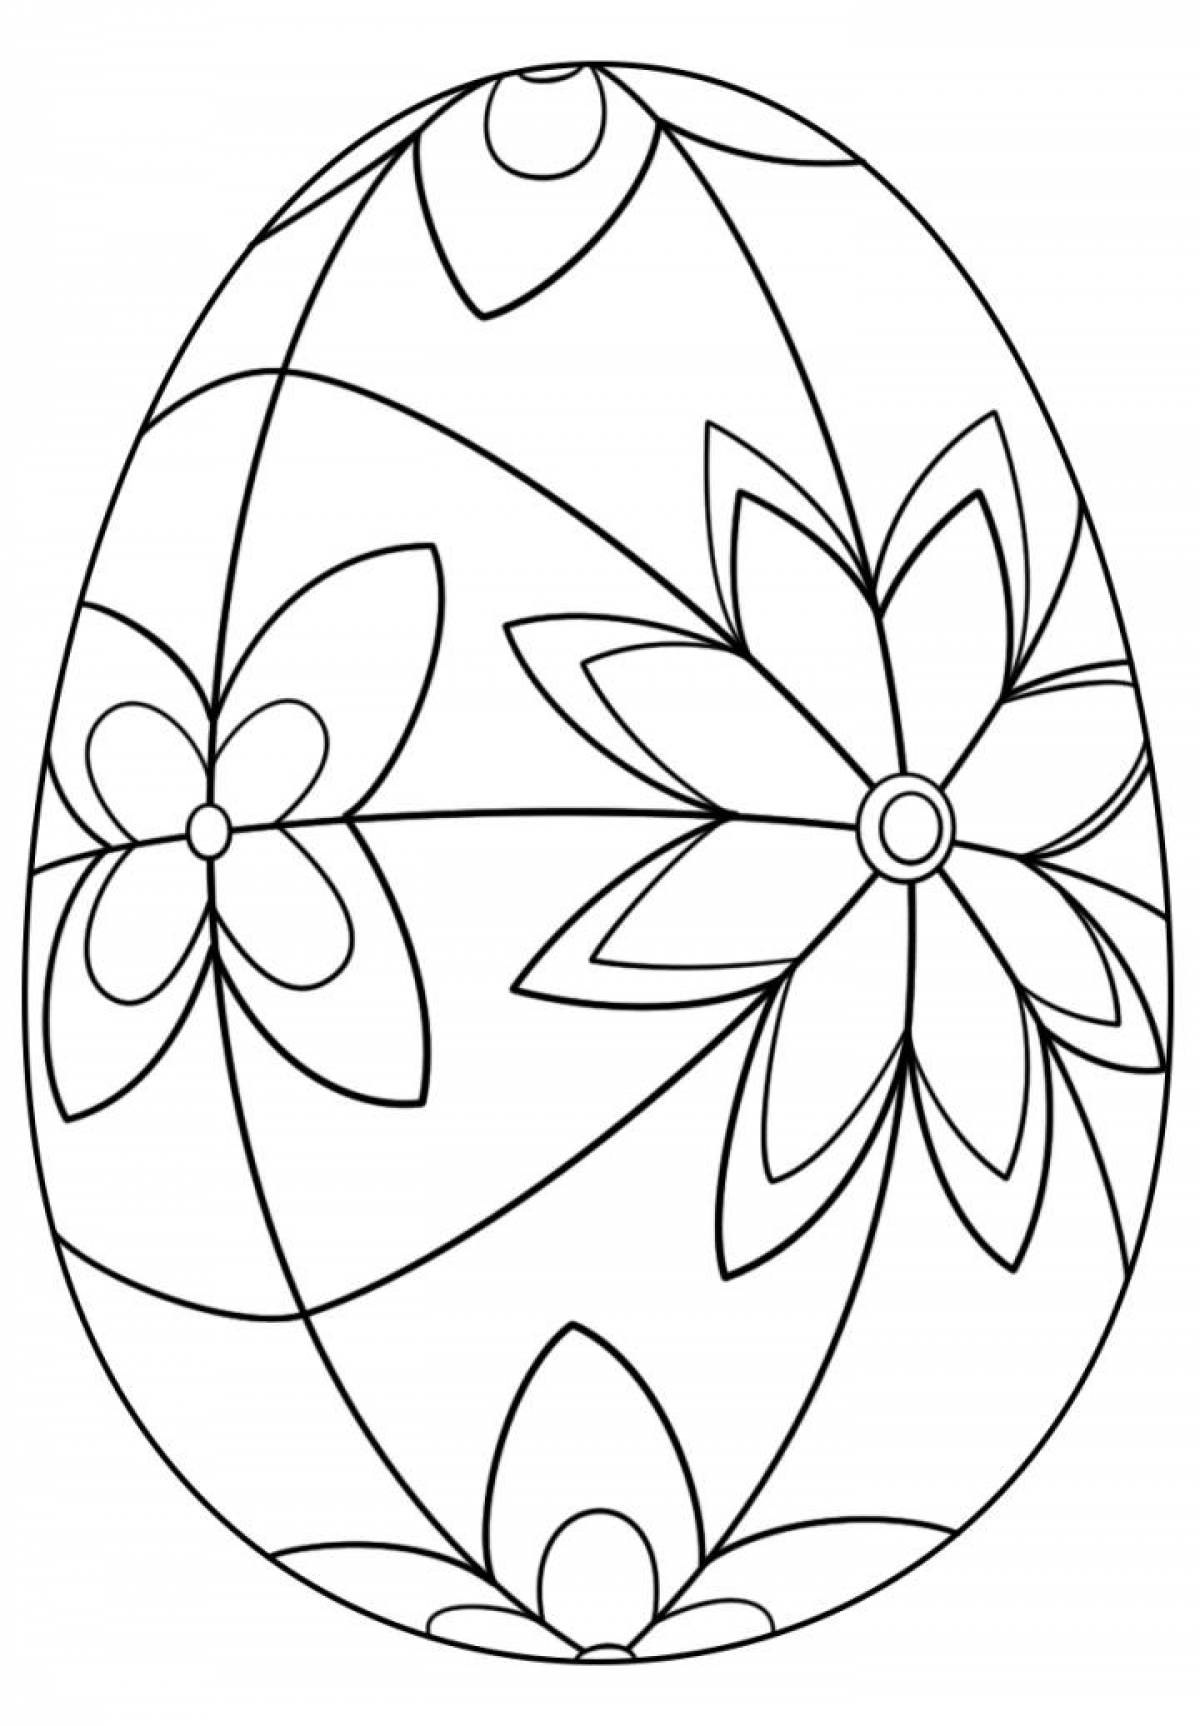 Playful easter egg coloring page